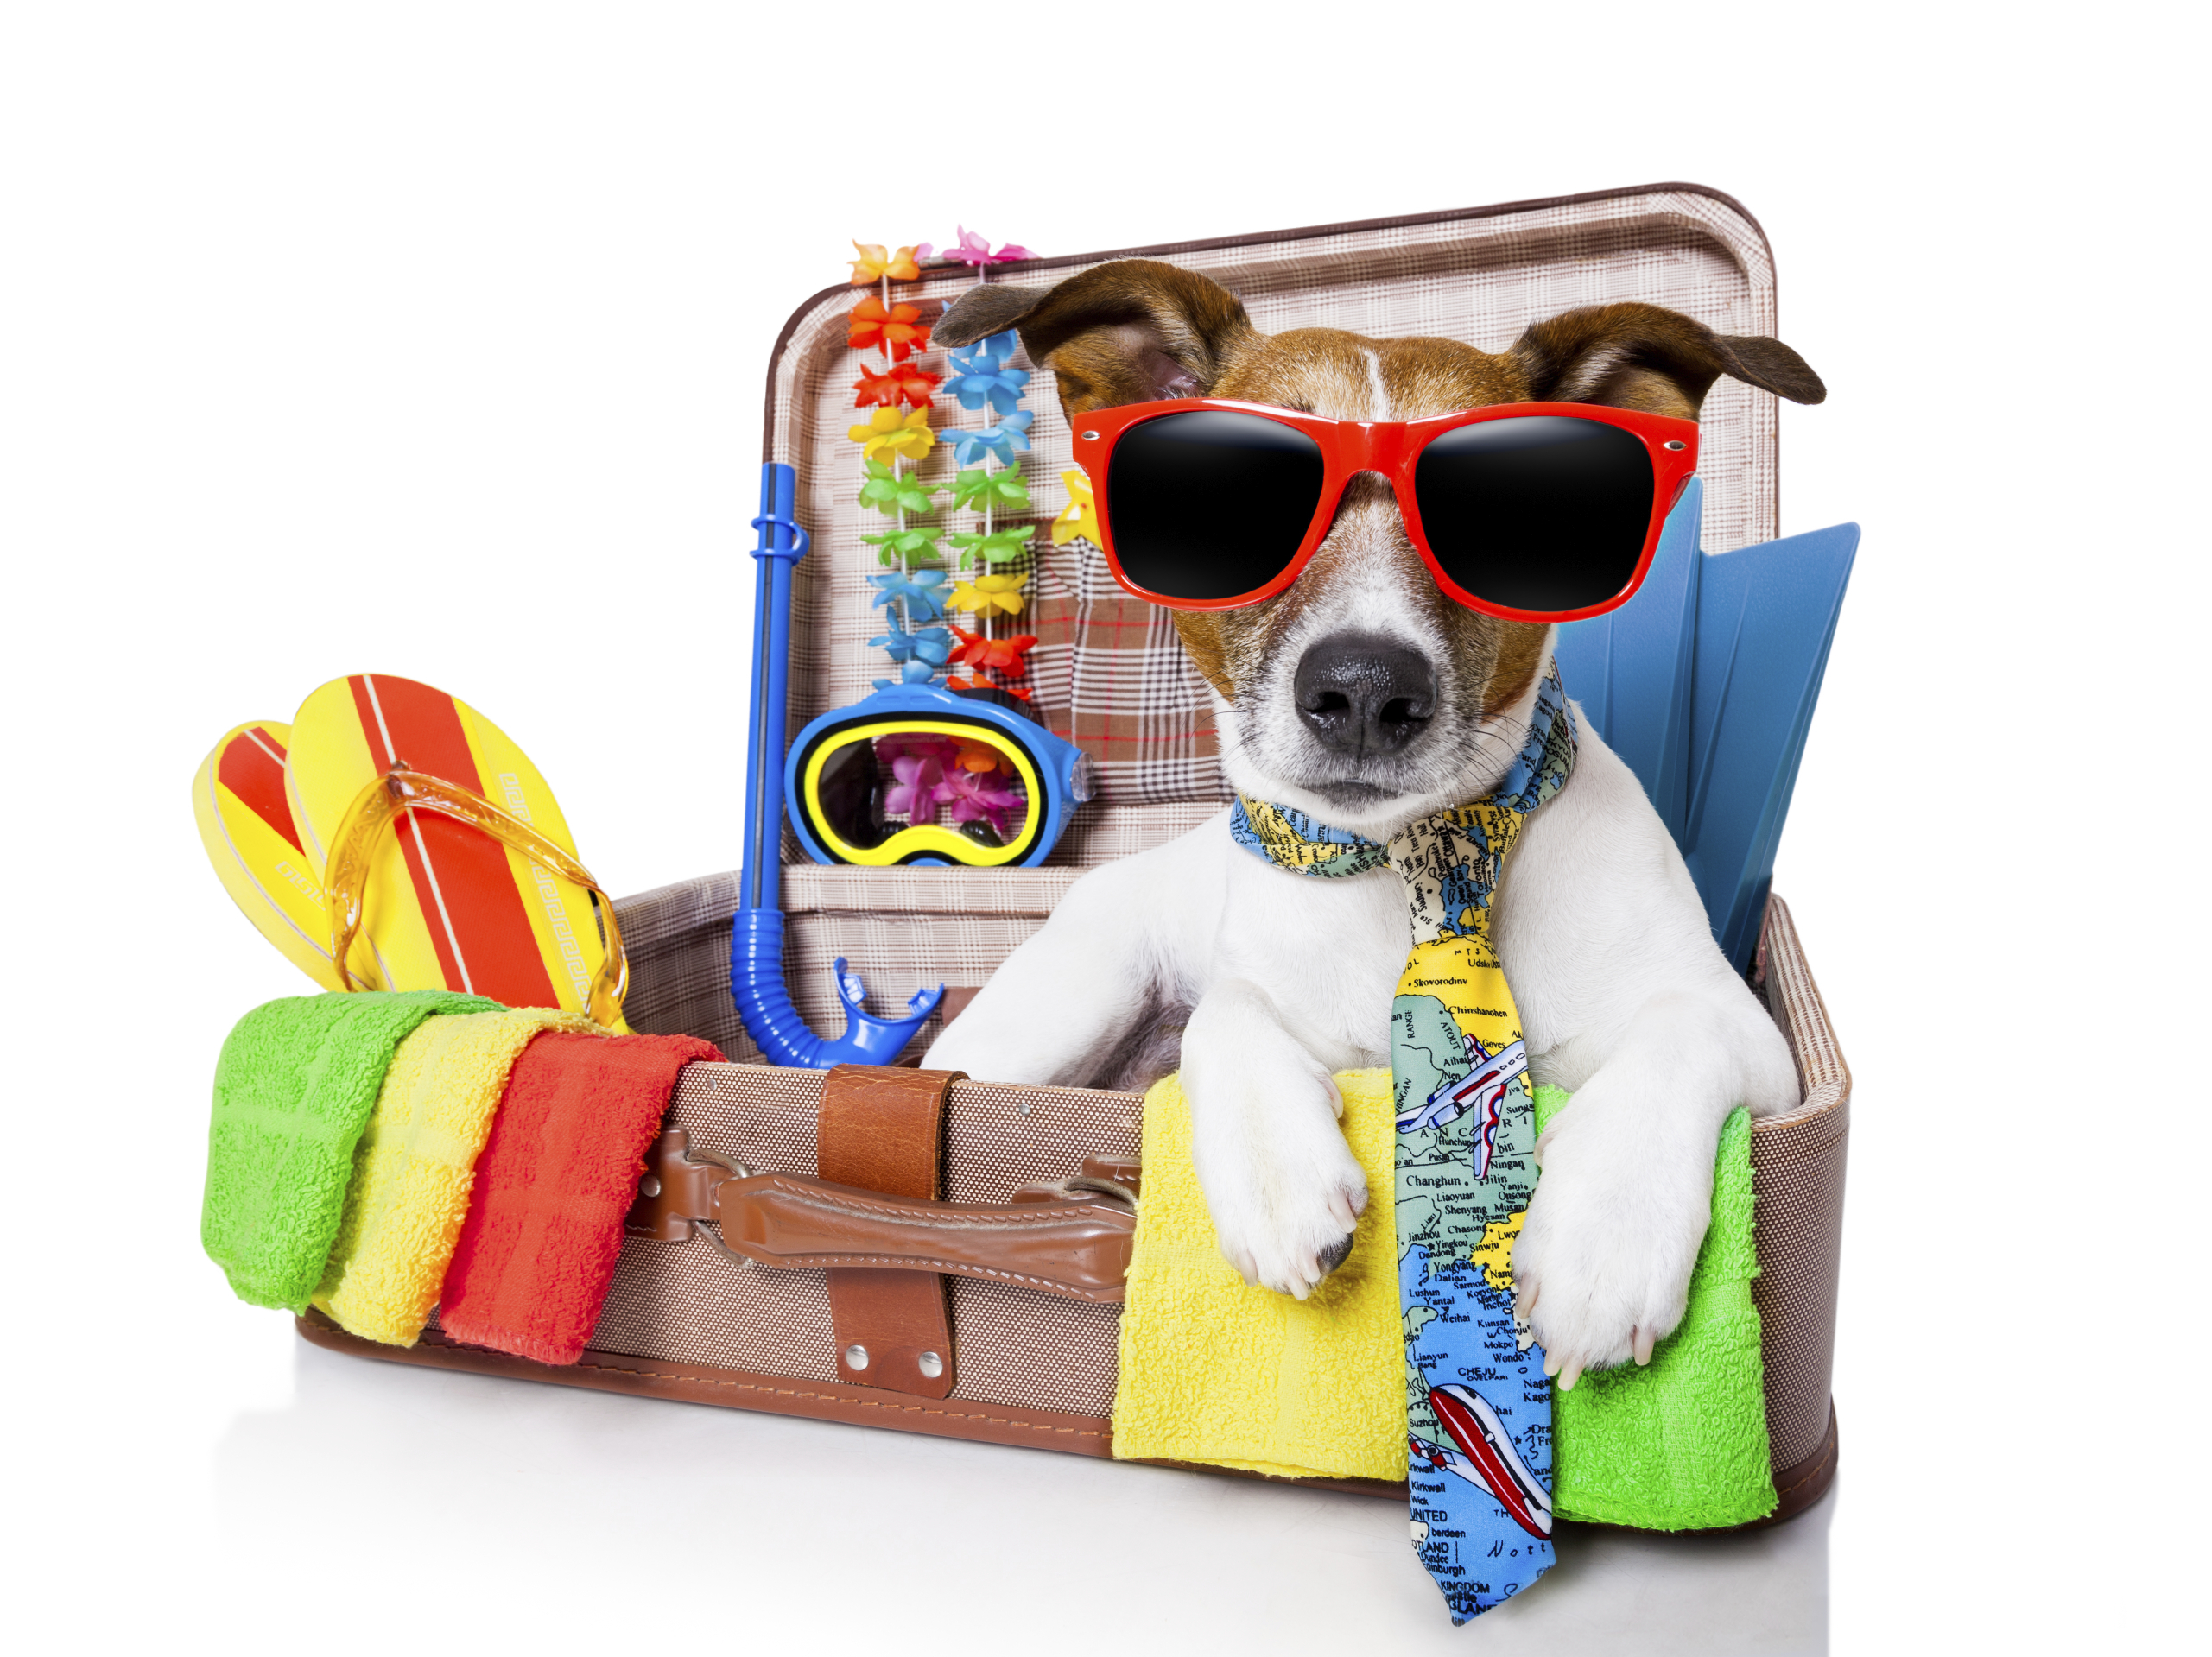 Does your dog need a holiday?